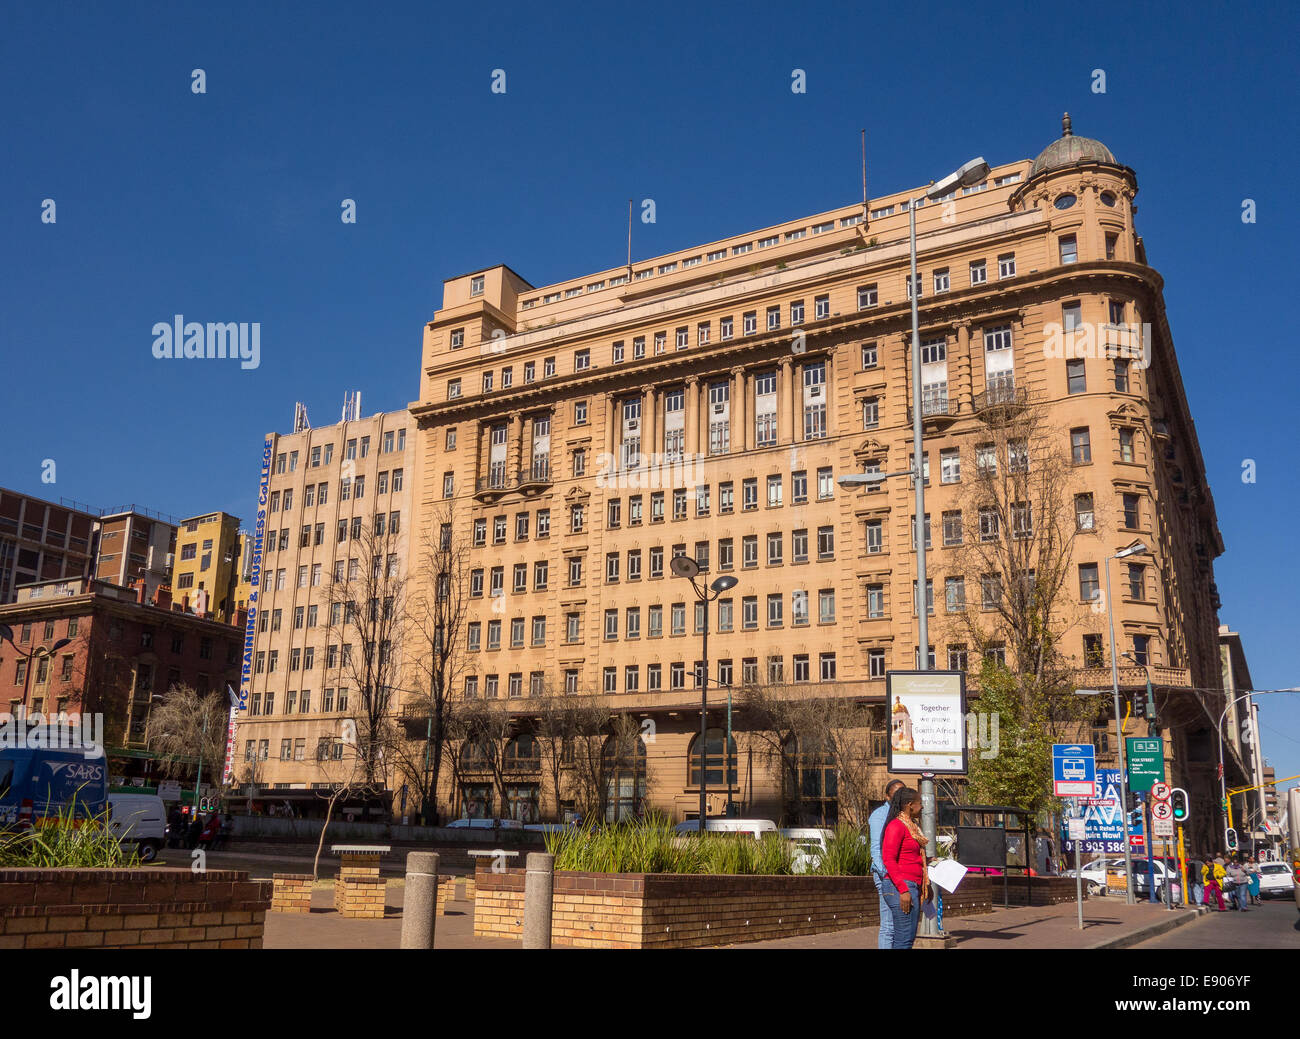 JOHANNESBURG, SOUTH AFRICA - Building in city center. Stock Photo